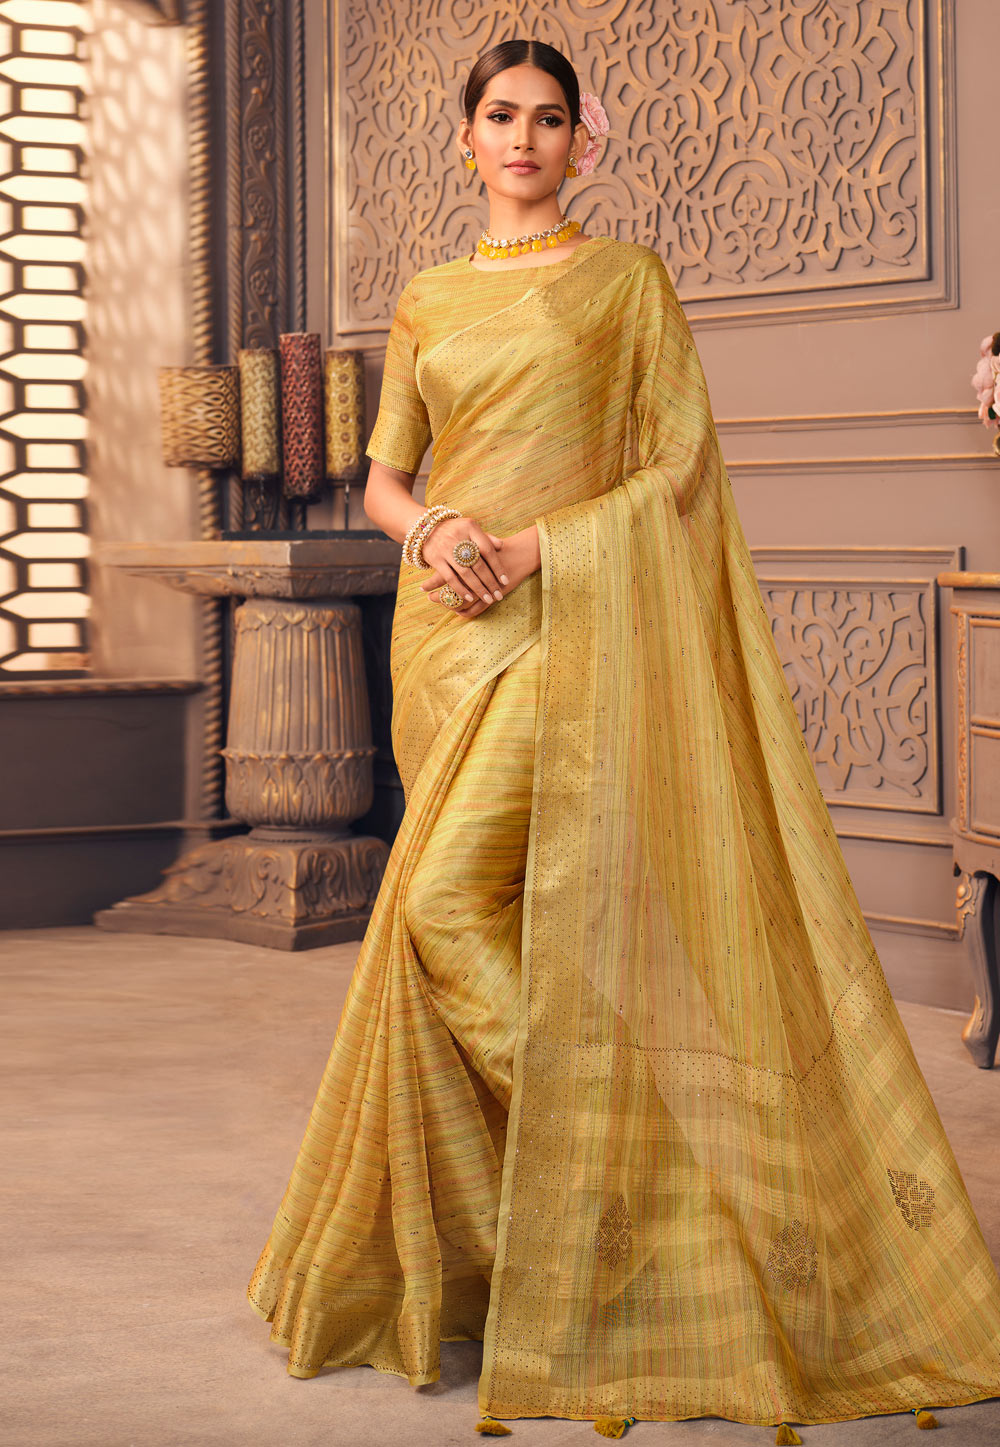 Organza Saree with blouse in Golden colour 1208